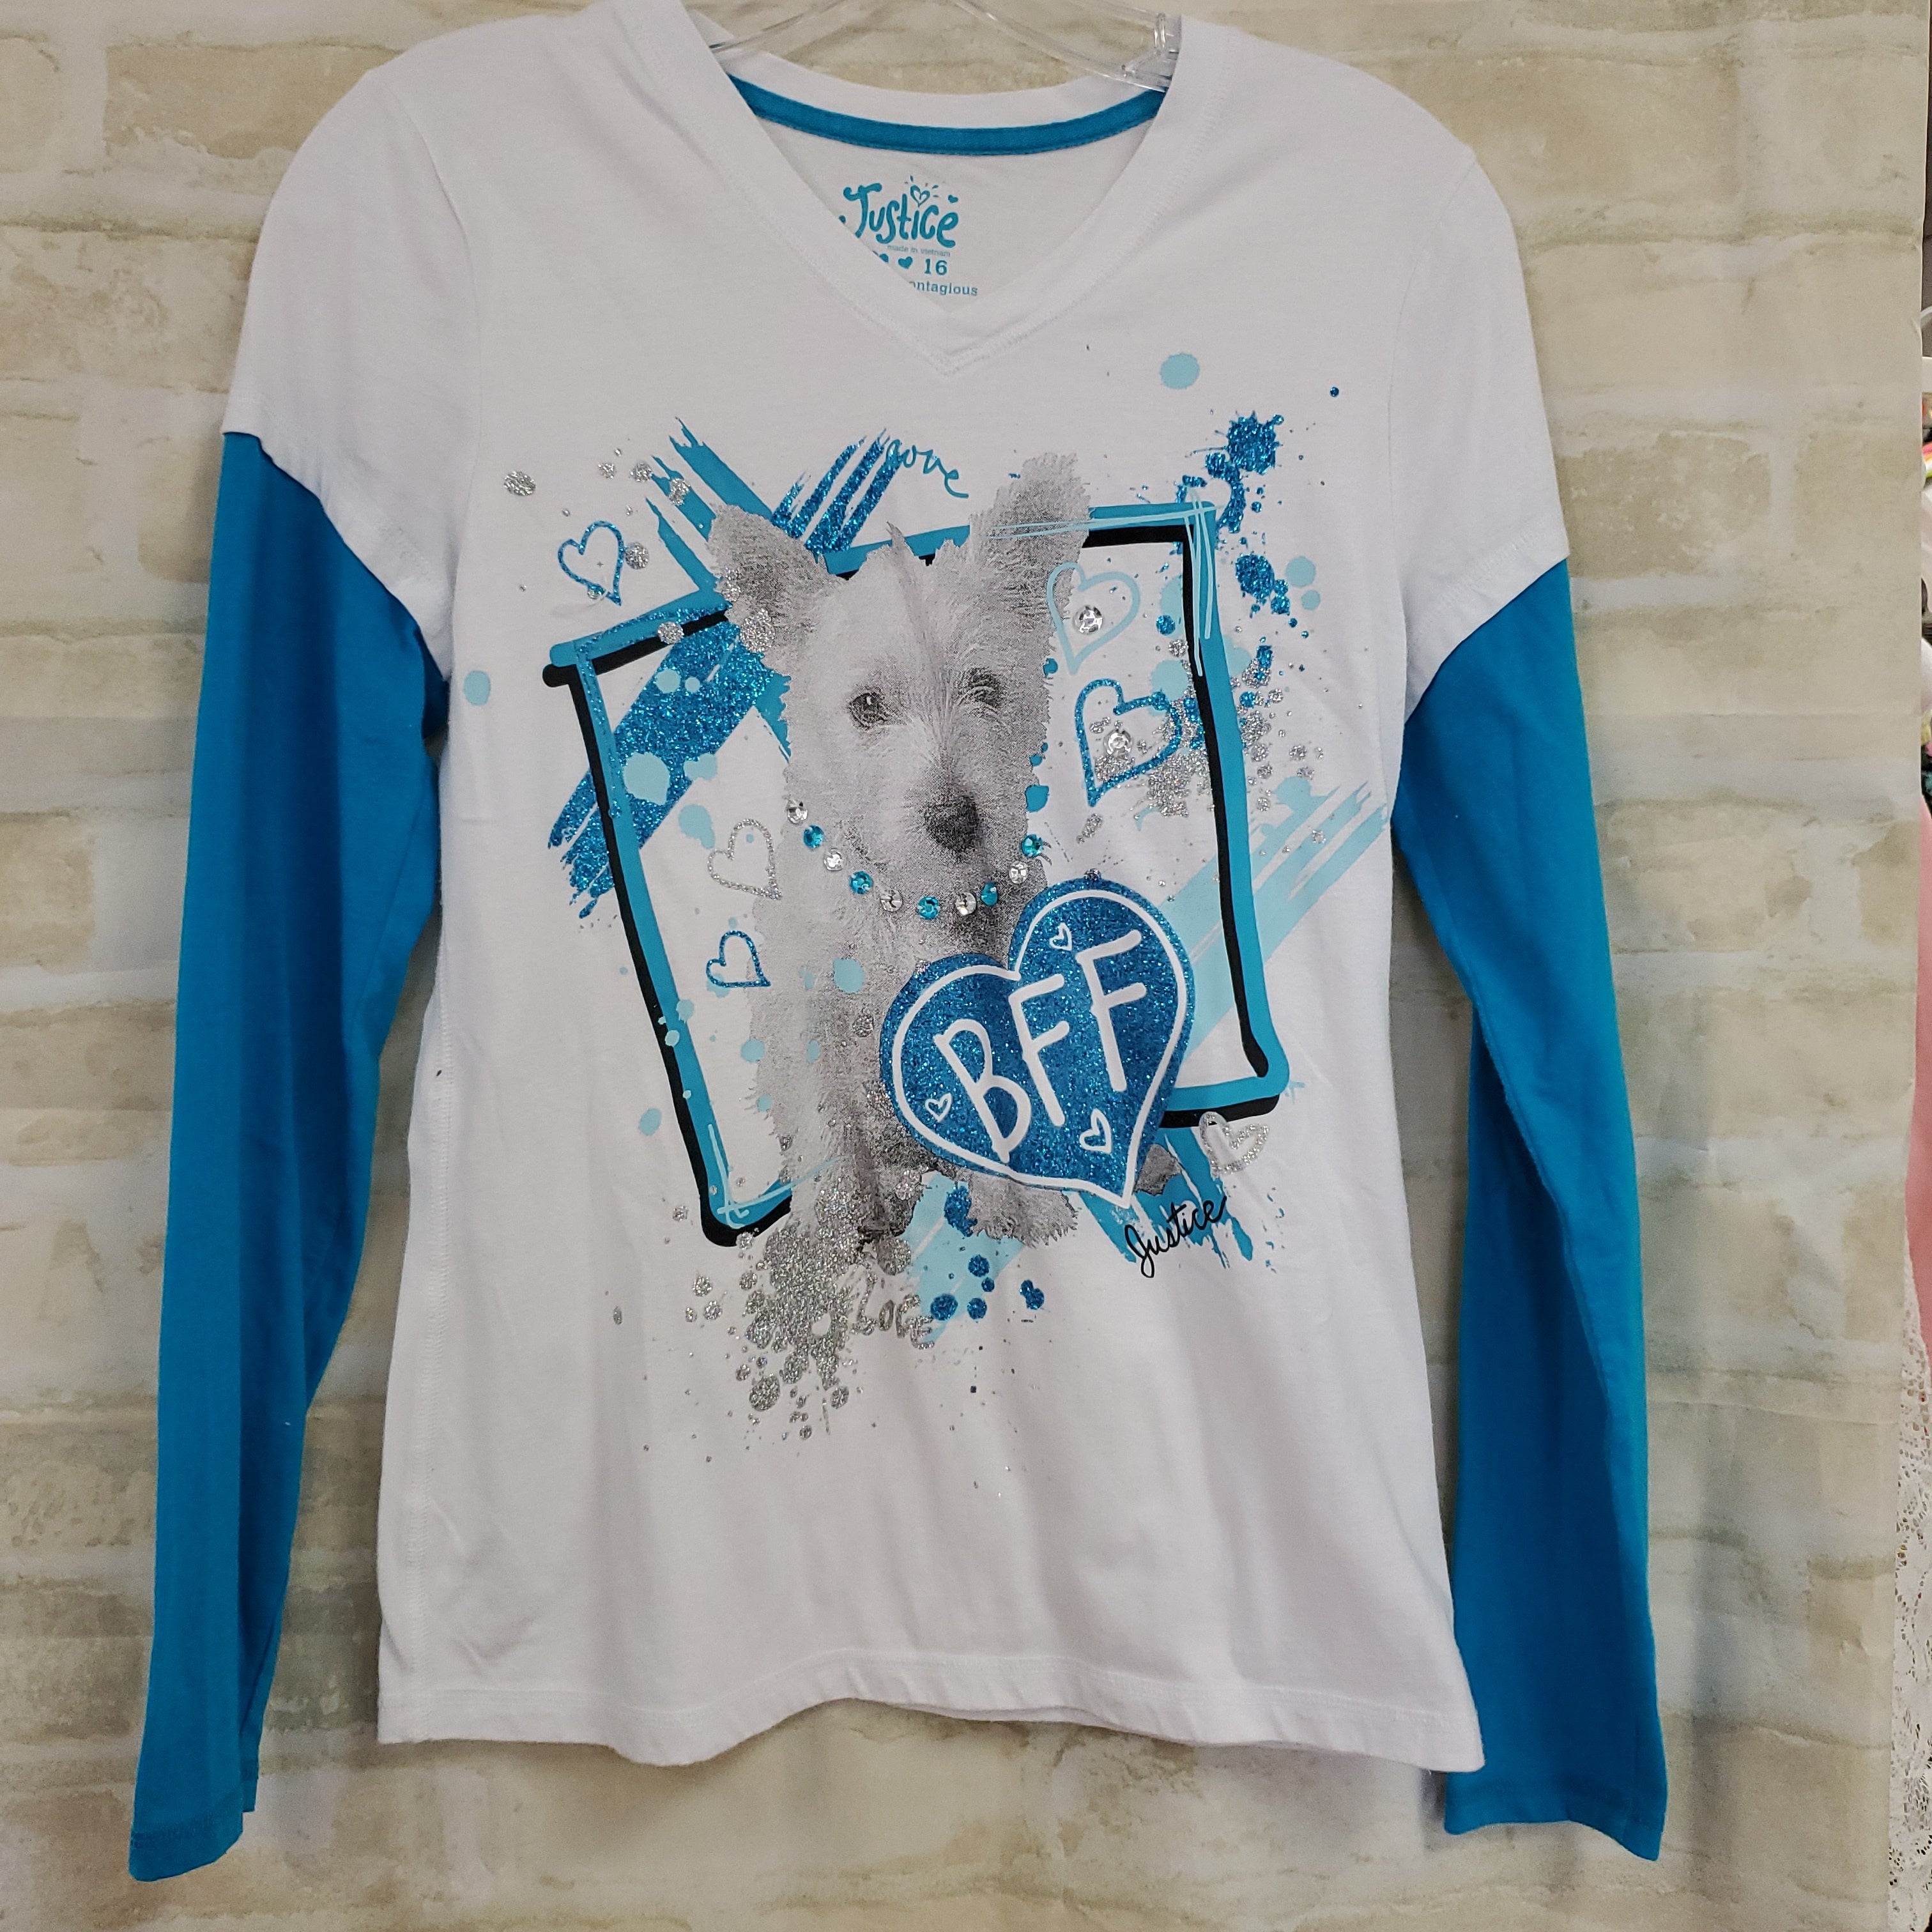 Justice girls top white blue sleeves L/S 16